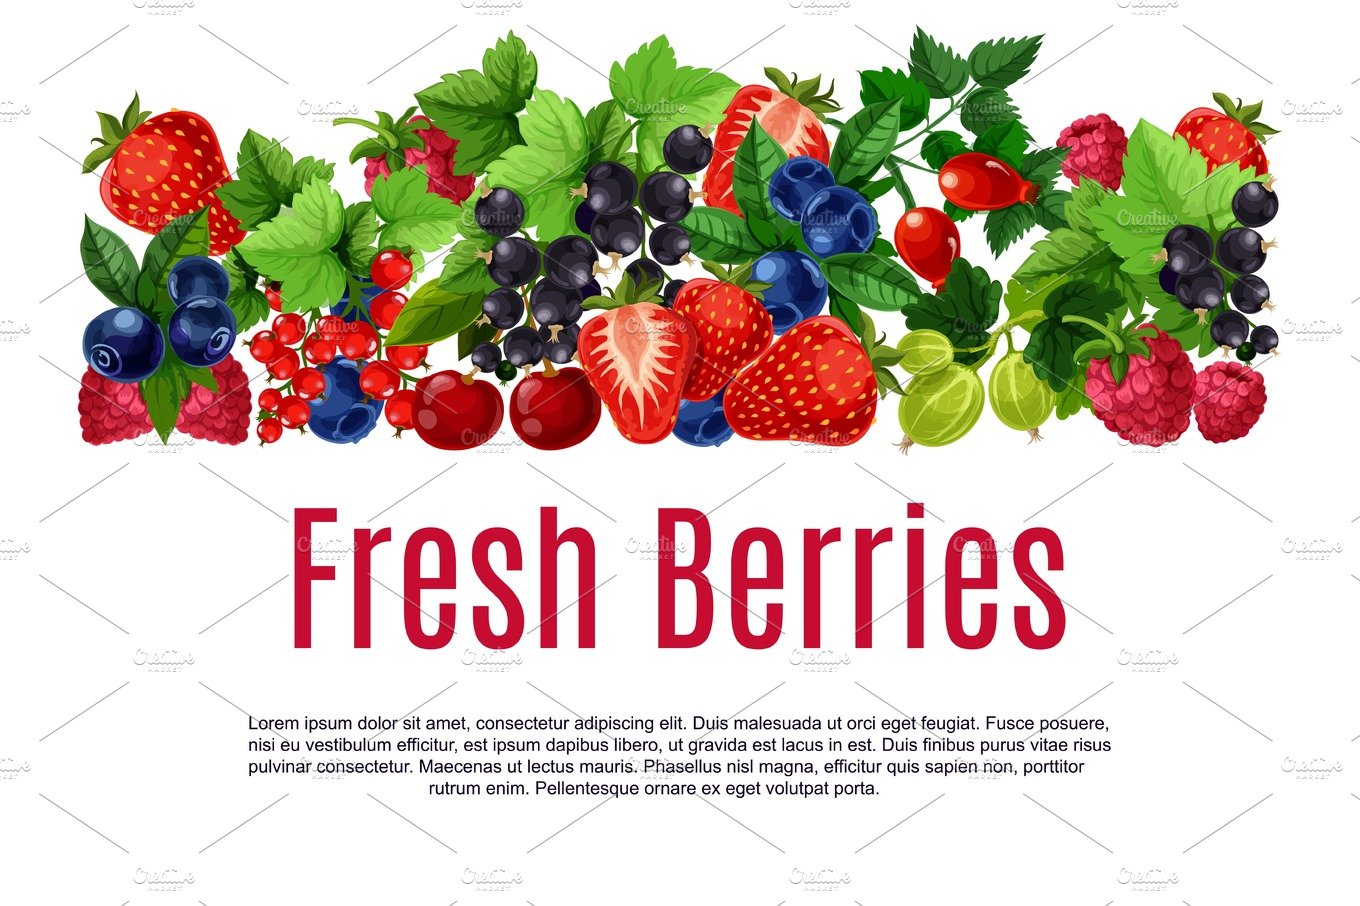 Fresh berries and fruits vector poster or banner cover image.